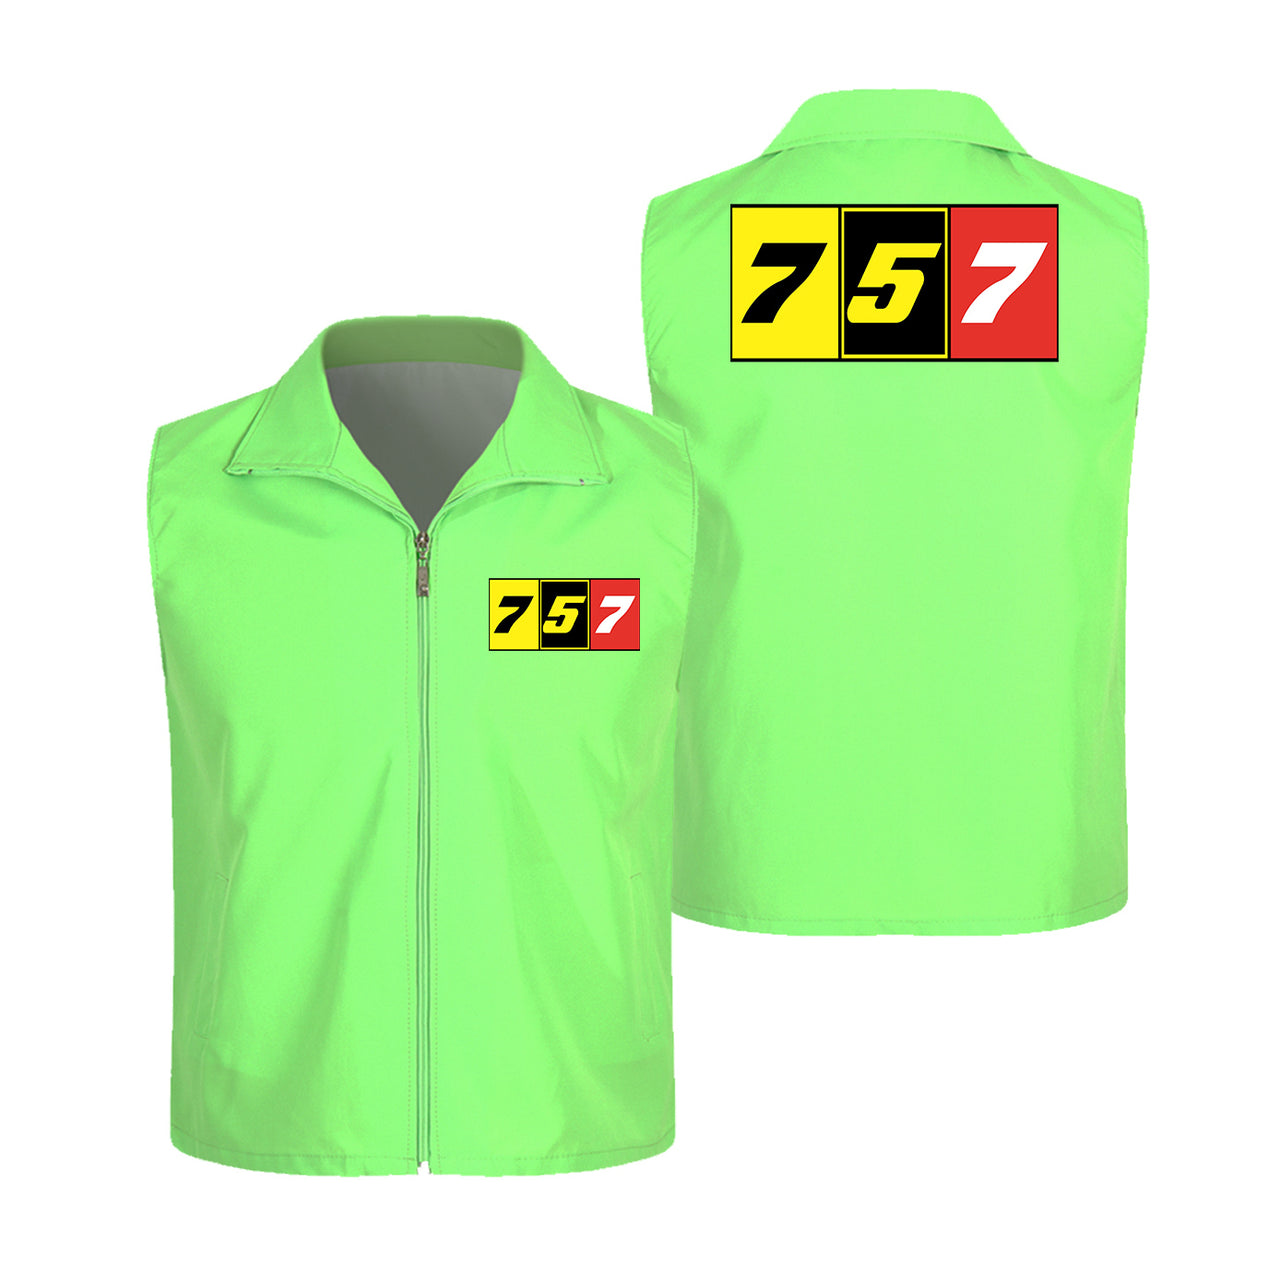 Flat Colourful 757 Designed Thin Style Vests